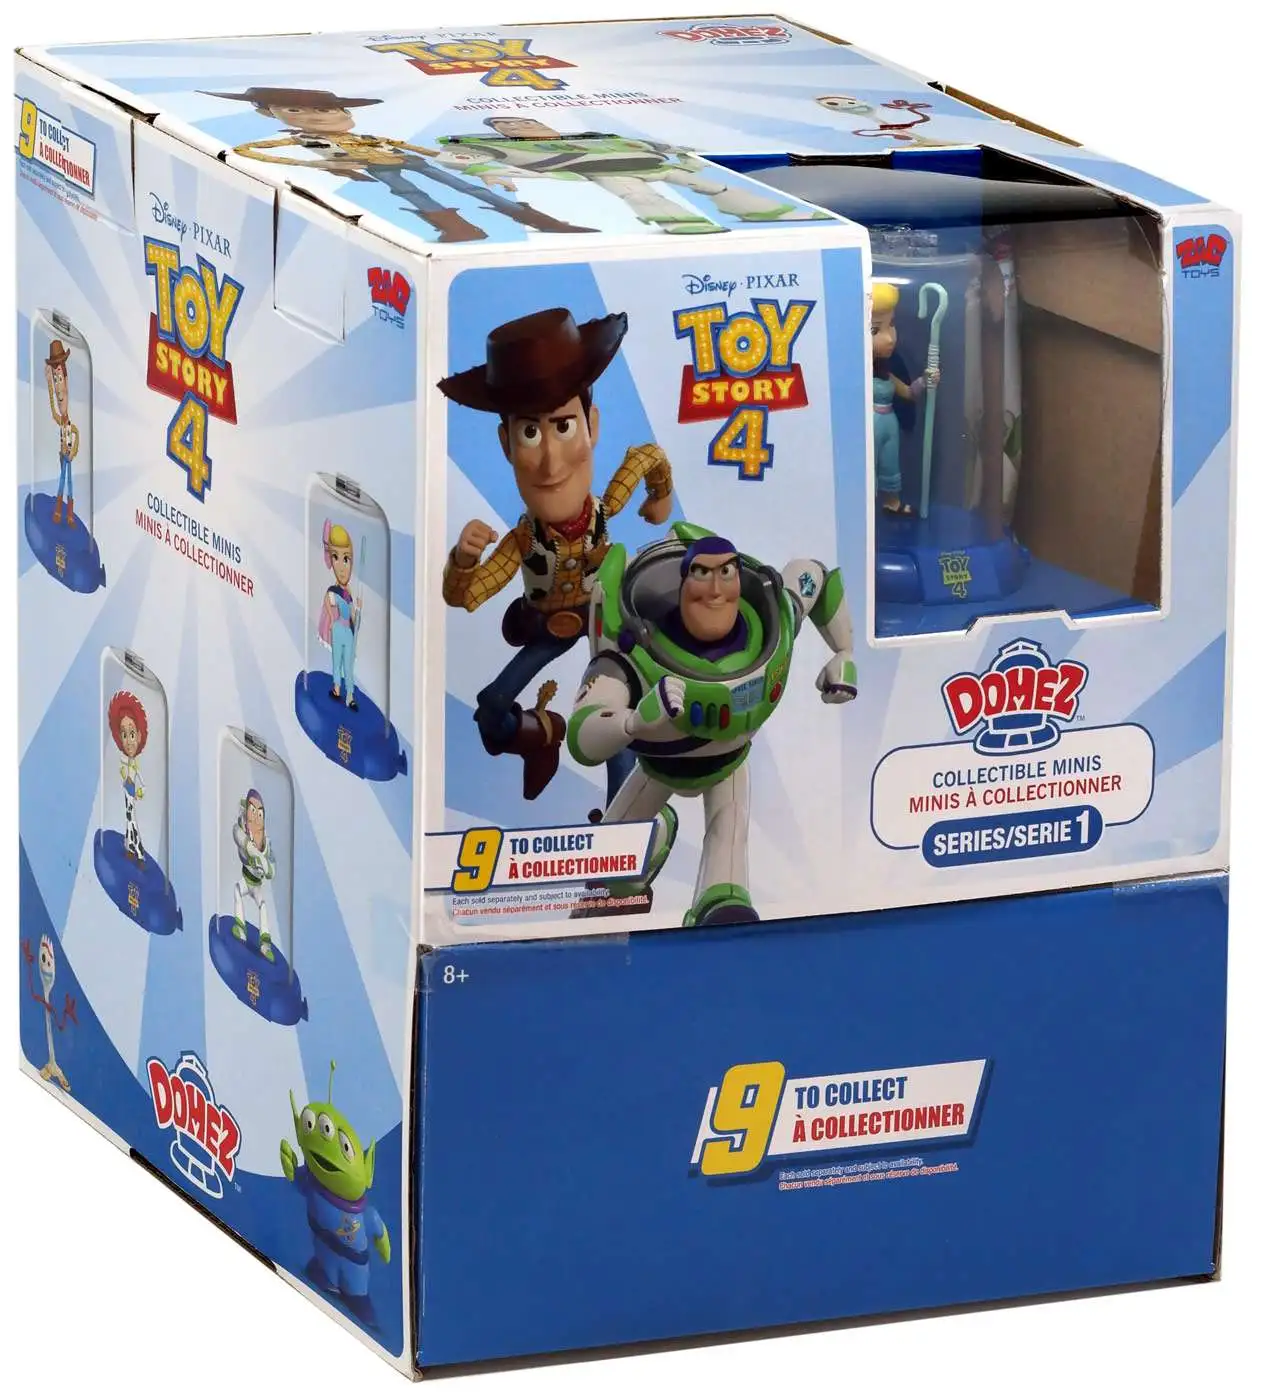 New Toy Story 4 Dome Lunch Bag